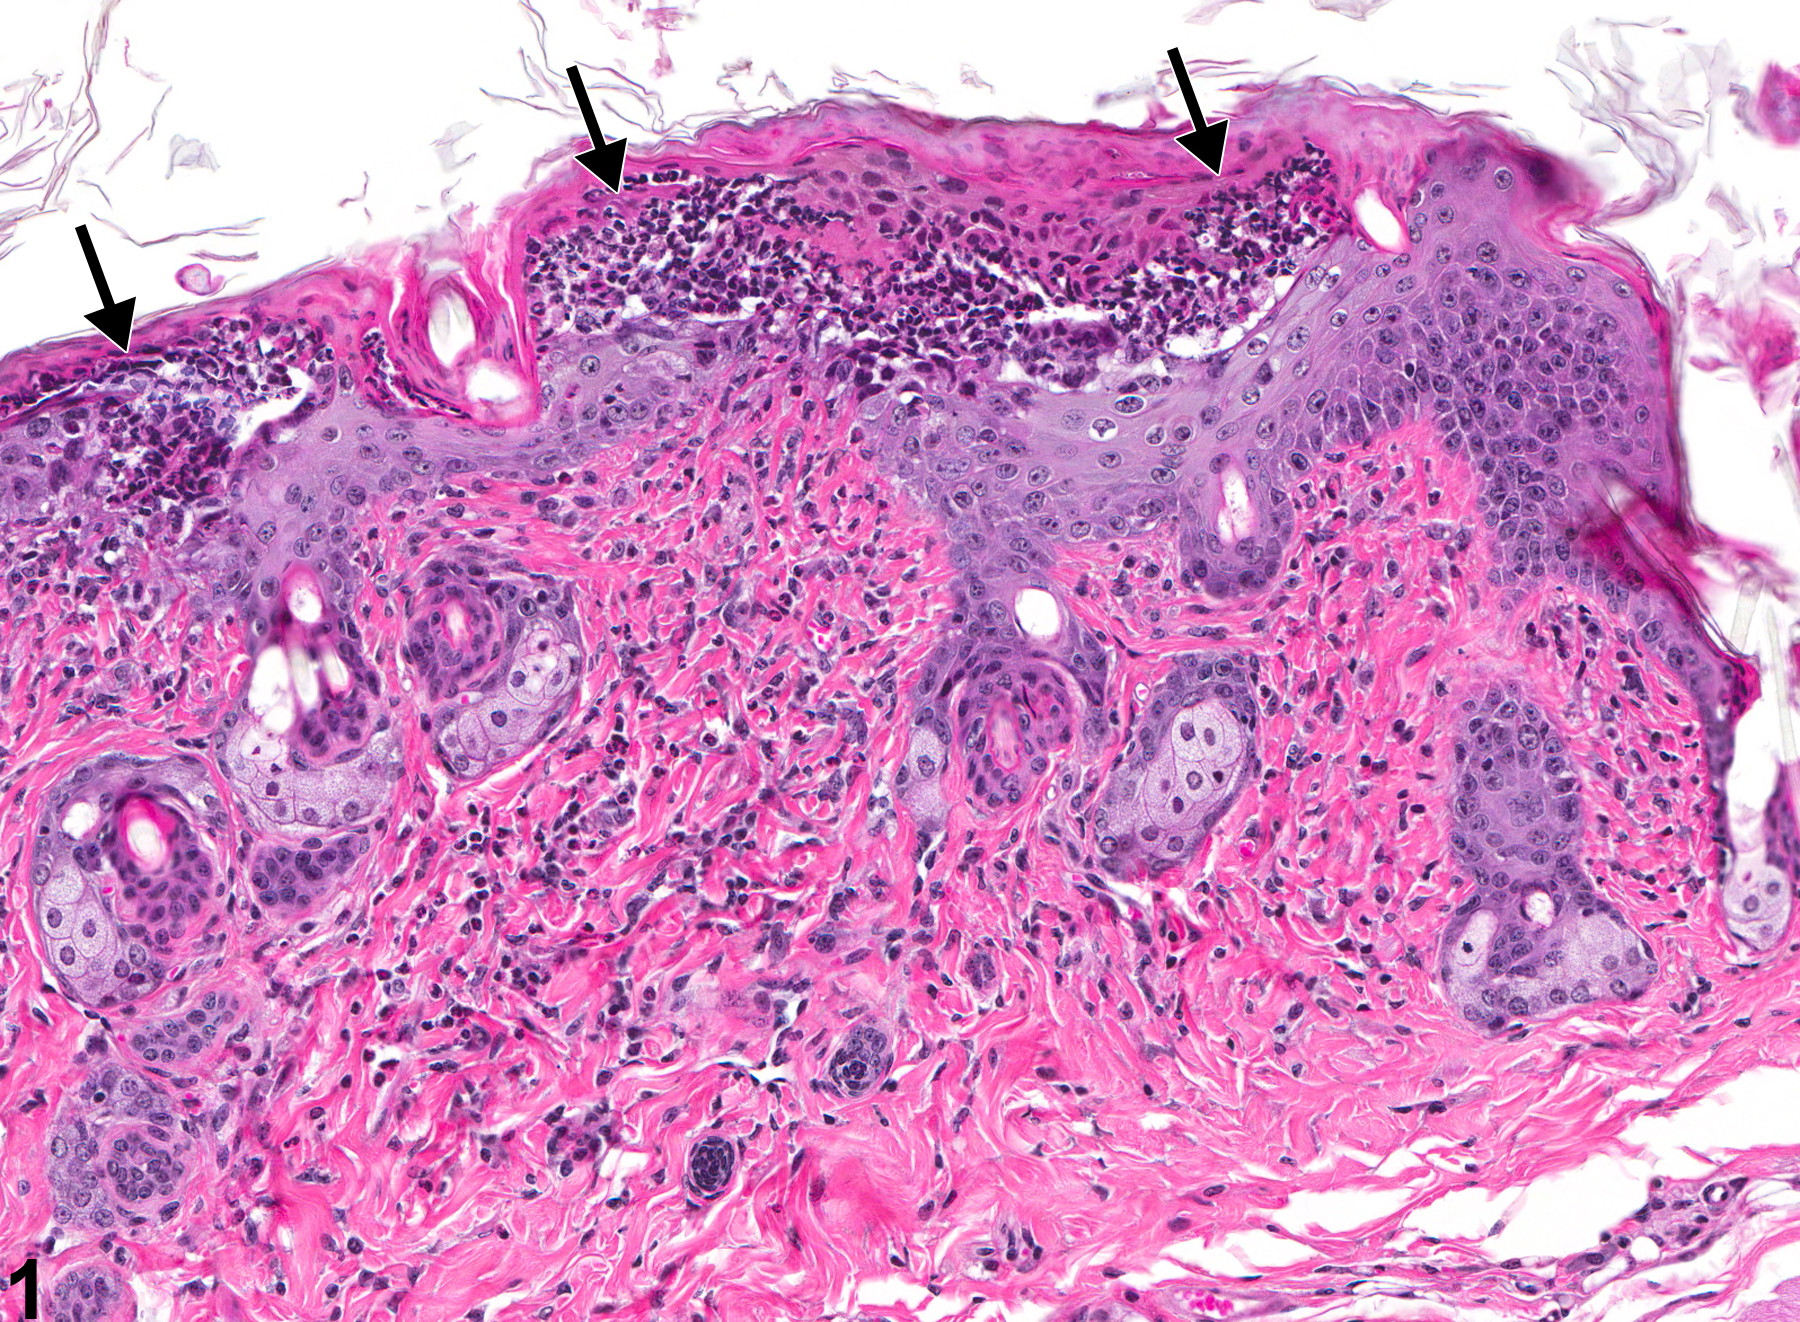 Image of pustule in the skin from a male B6C3F1 mouse in a subchronic study